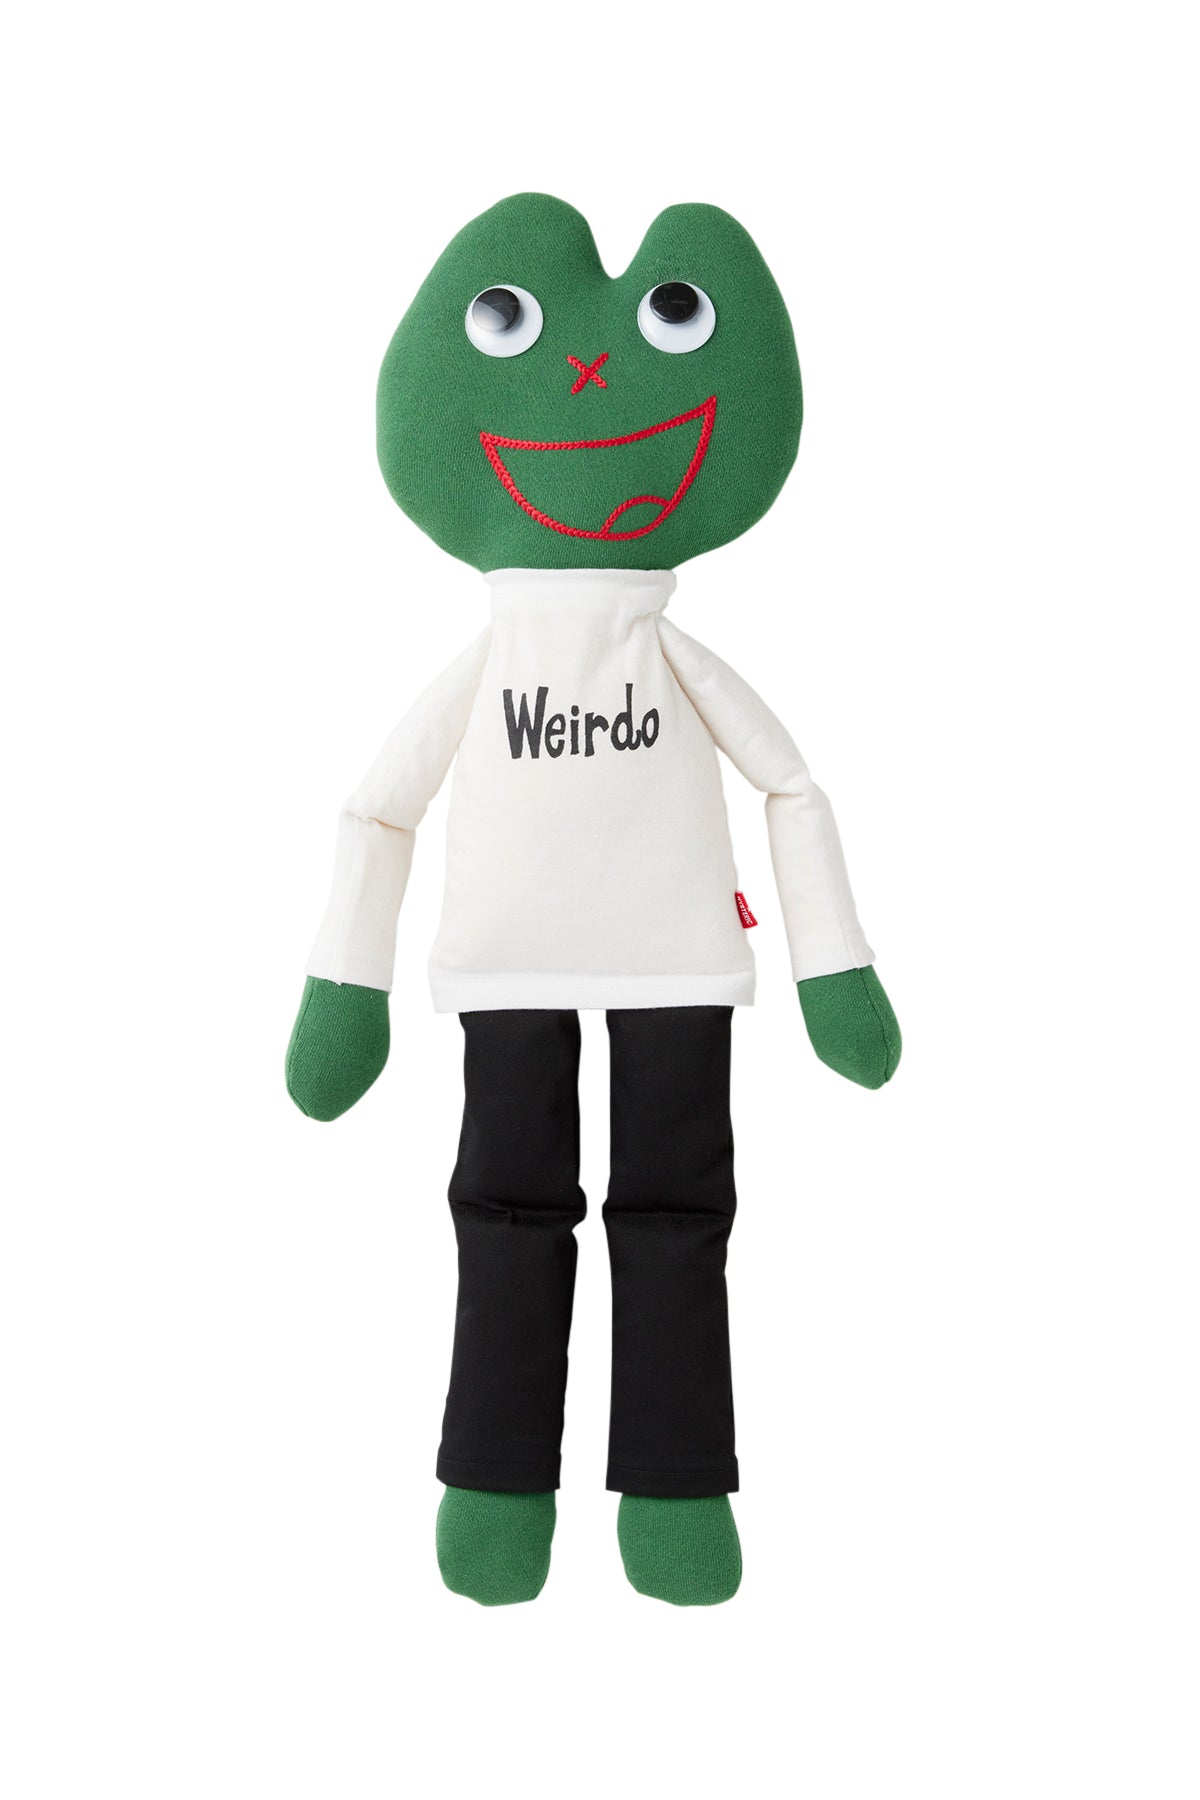 The PAM X HYSTERIC GLAMOUR - WEIRDO TOY  available online with global shipping, and in PAM Stores Melbourne and Sydney.